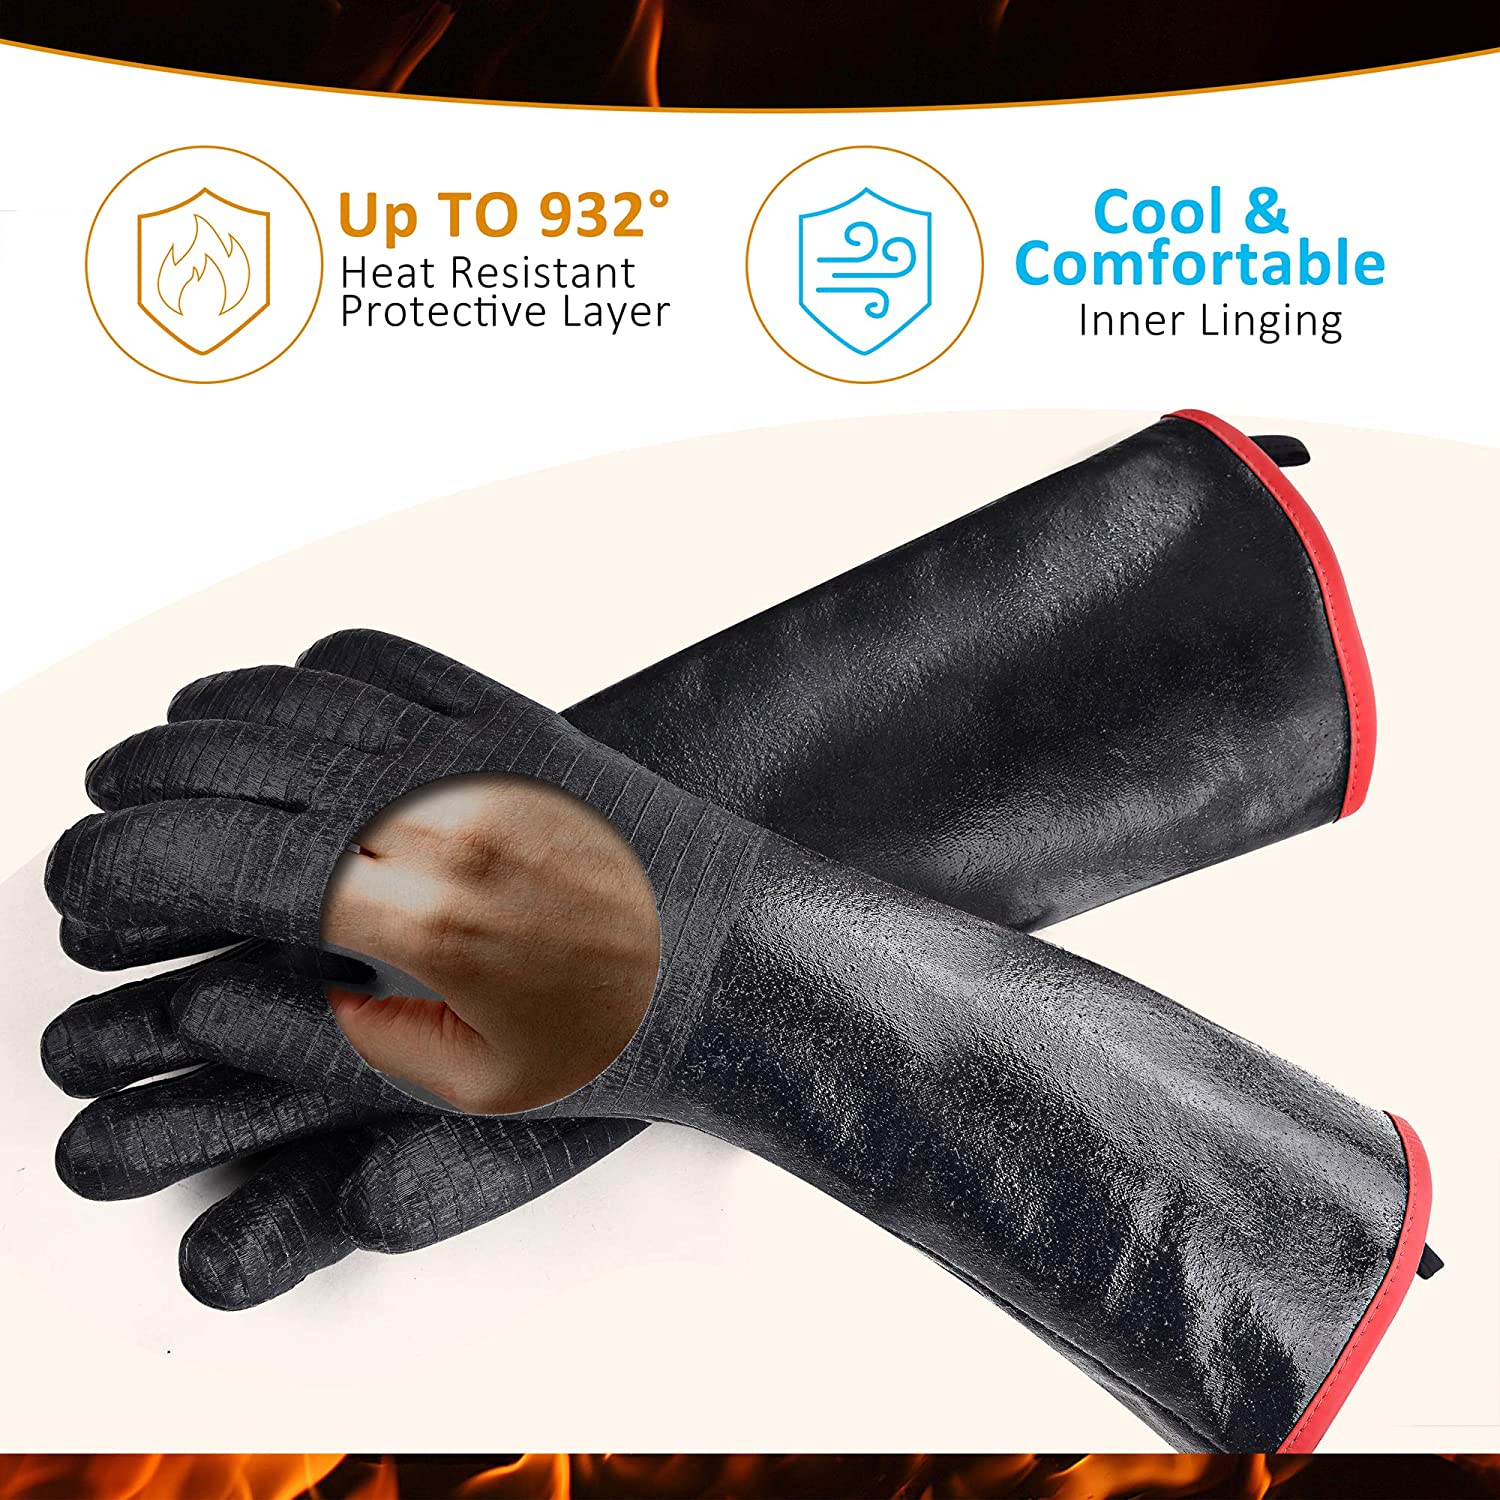 Heat Resistant-Smoker BBQ Gloves 18 Inches,932℉, Grill, Cooking Barbecue Gloves, to Handling Heat Food Right on Your Fryer,Grill,Oven. Waterproof, Fireproof, Oil Resistant Neoprene Coating - image 4 of 7